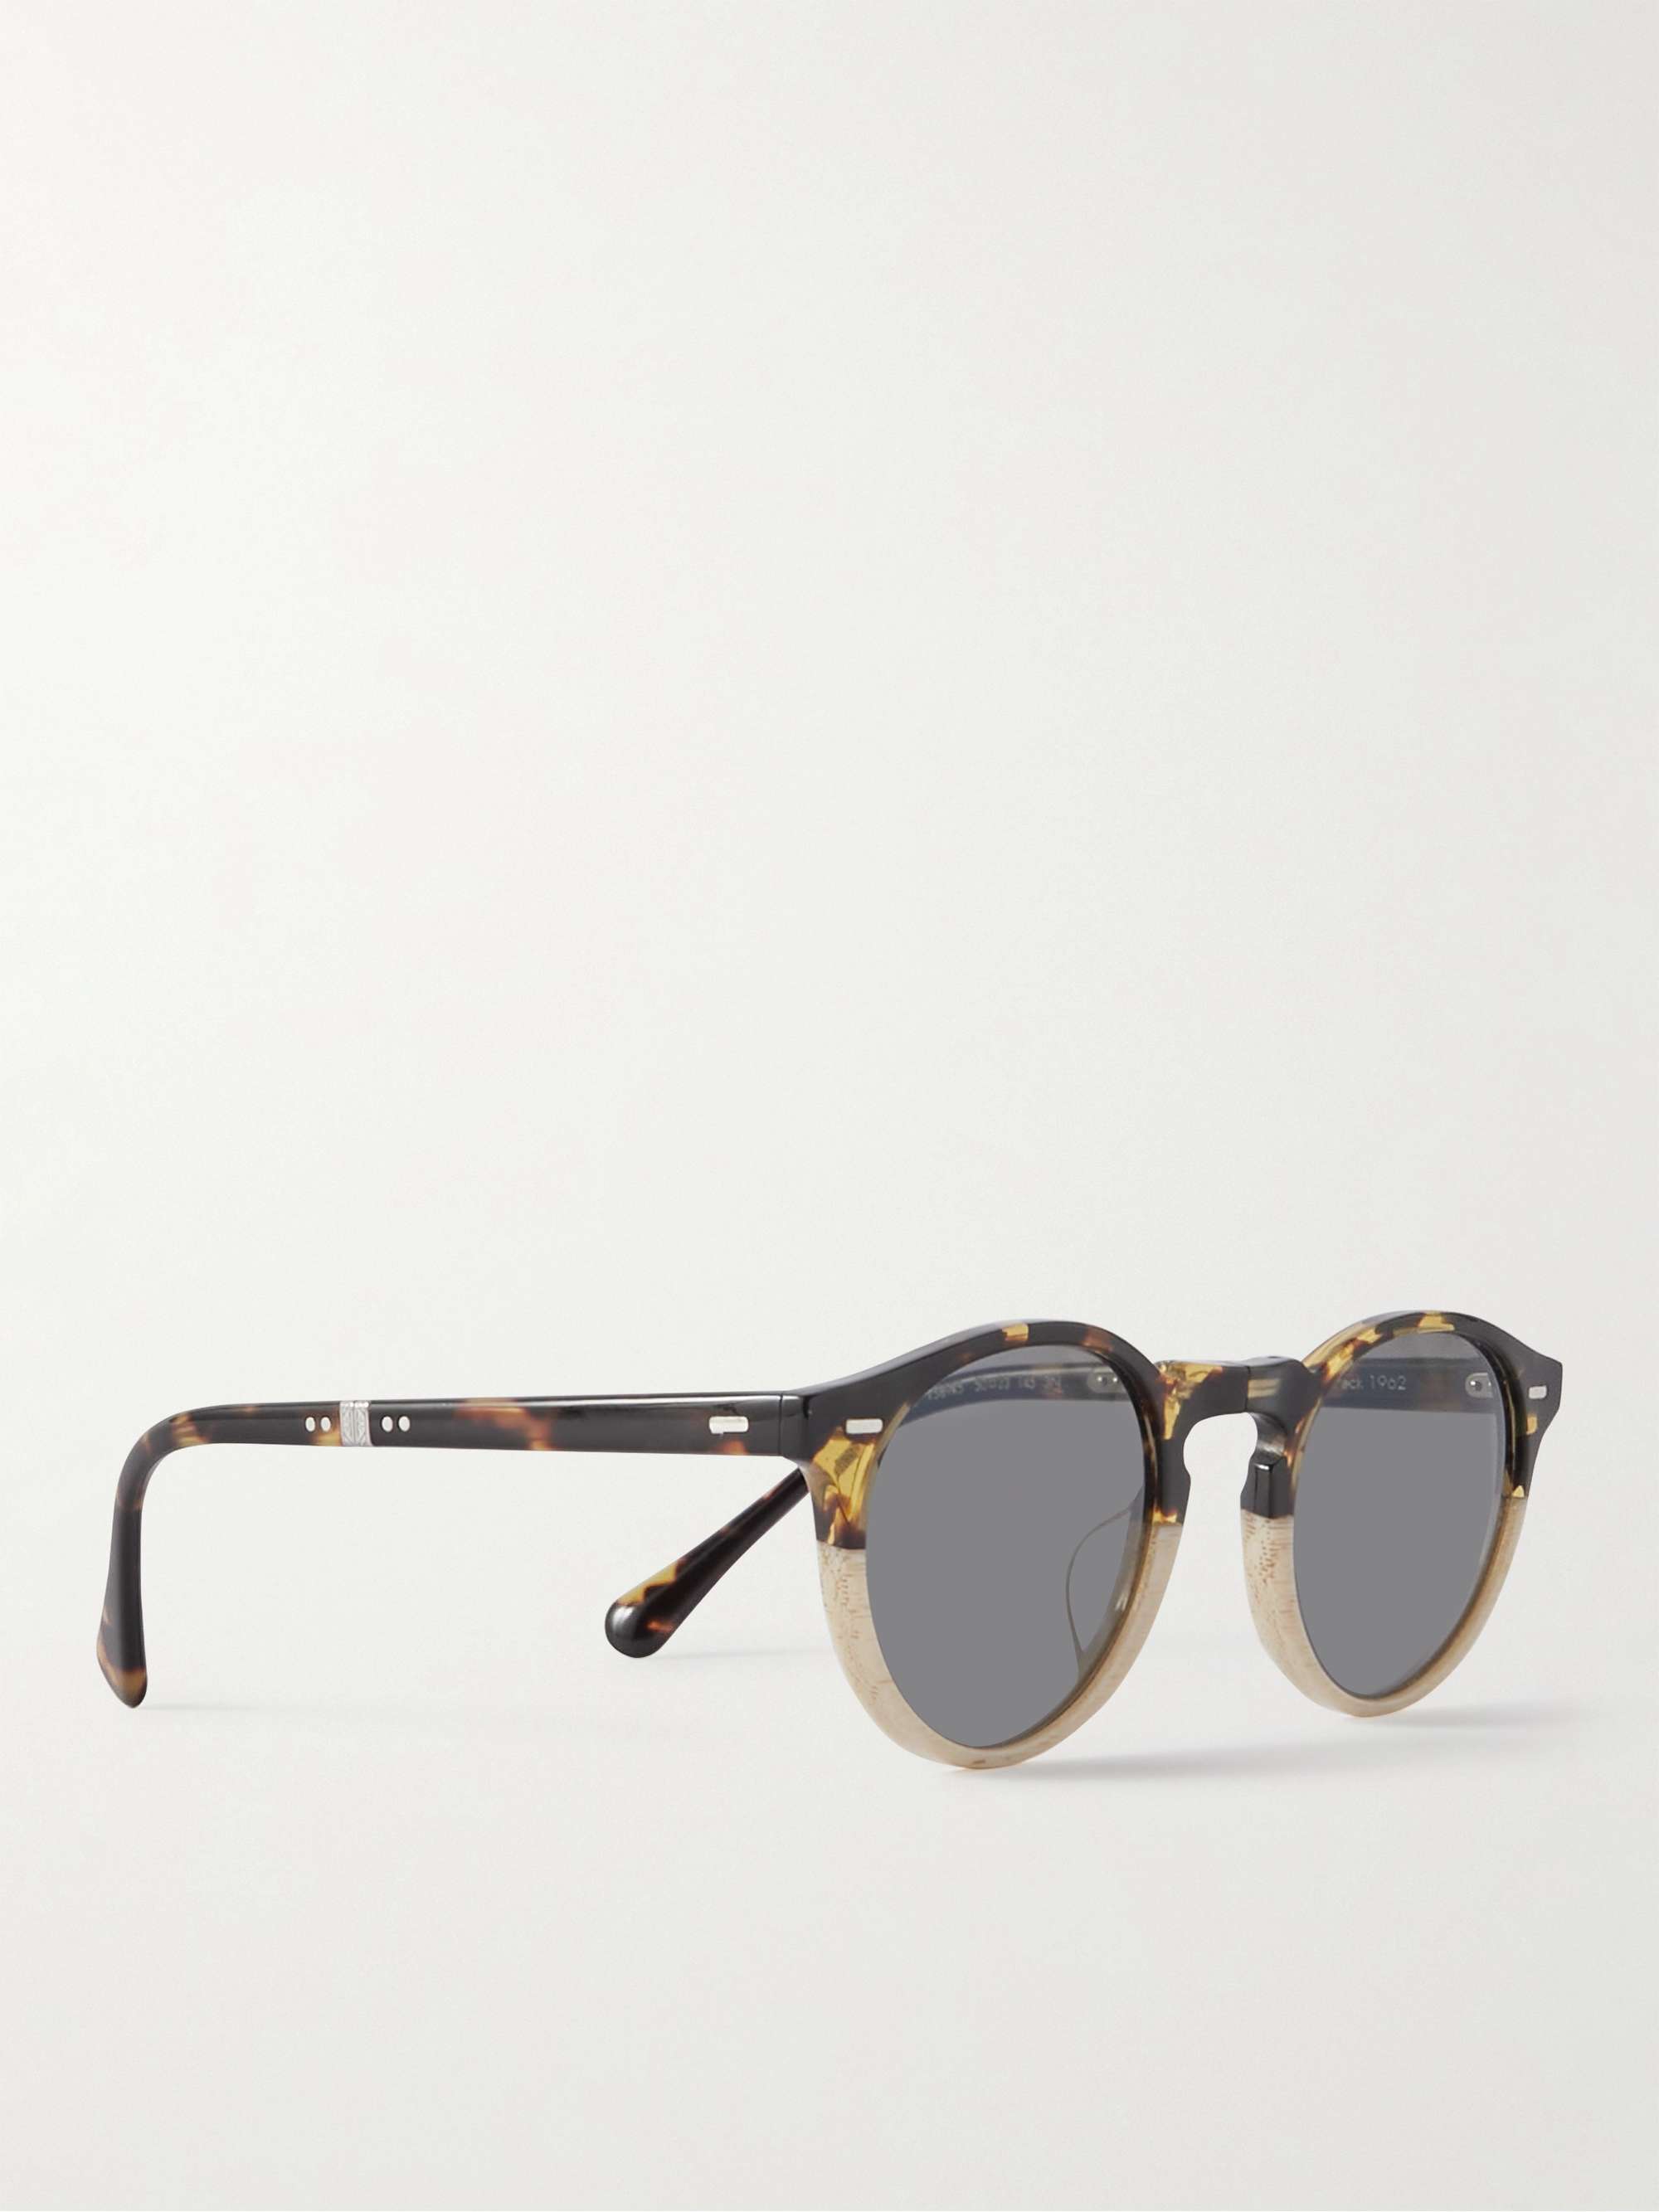 OLIVER PEOPLES Gregory Peck 1962 Foldable Round-Frame Acetate Sunglasses